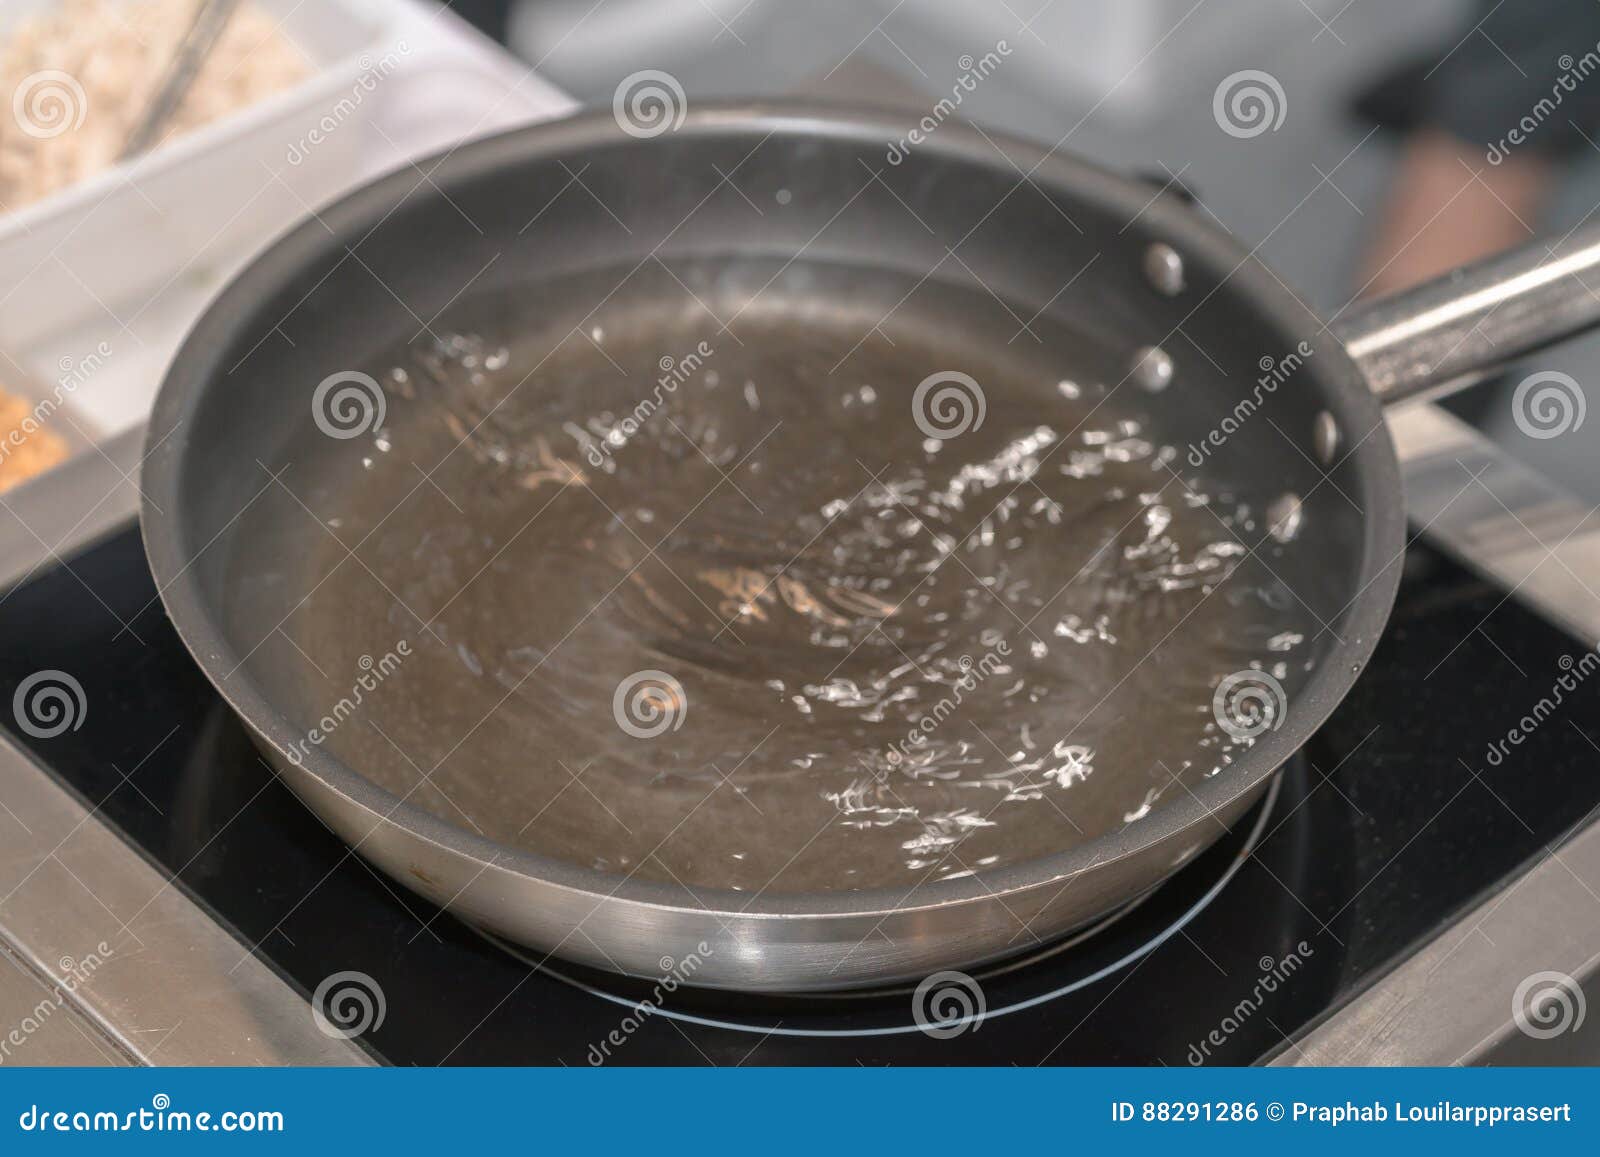 Boiling water in cooking pot Stock Photo by ©jan_mach 288664316